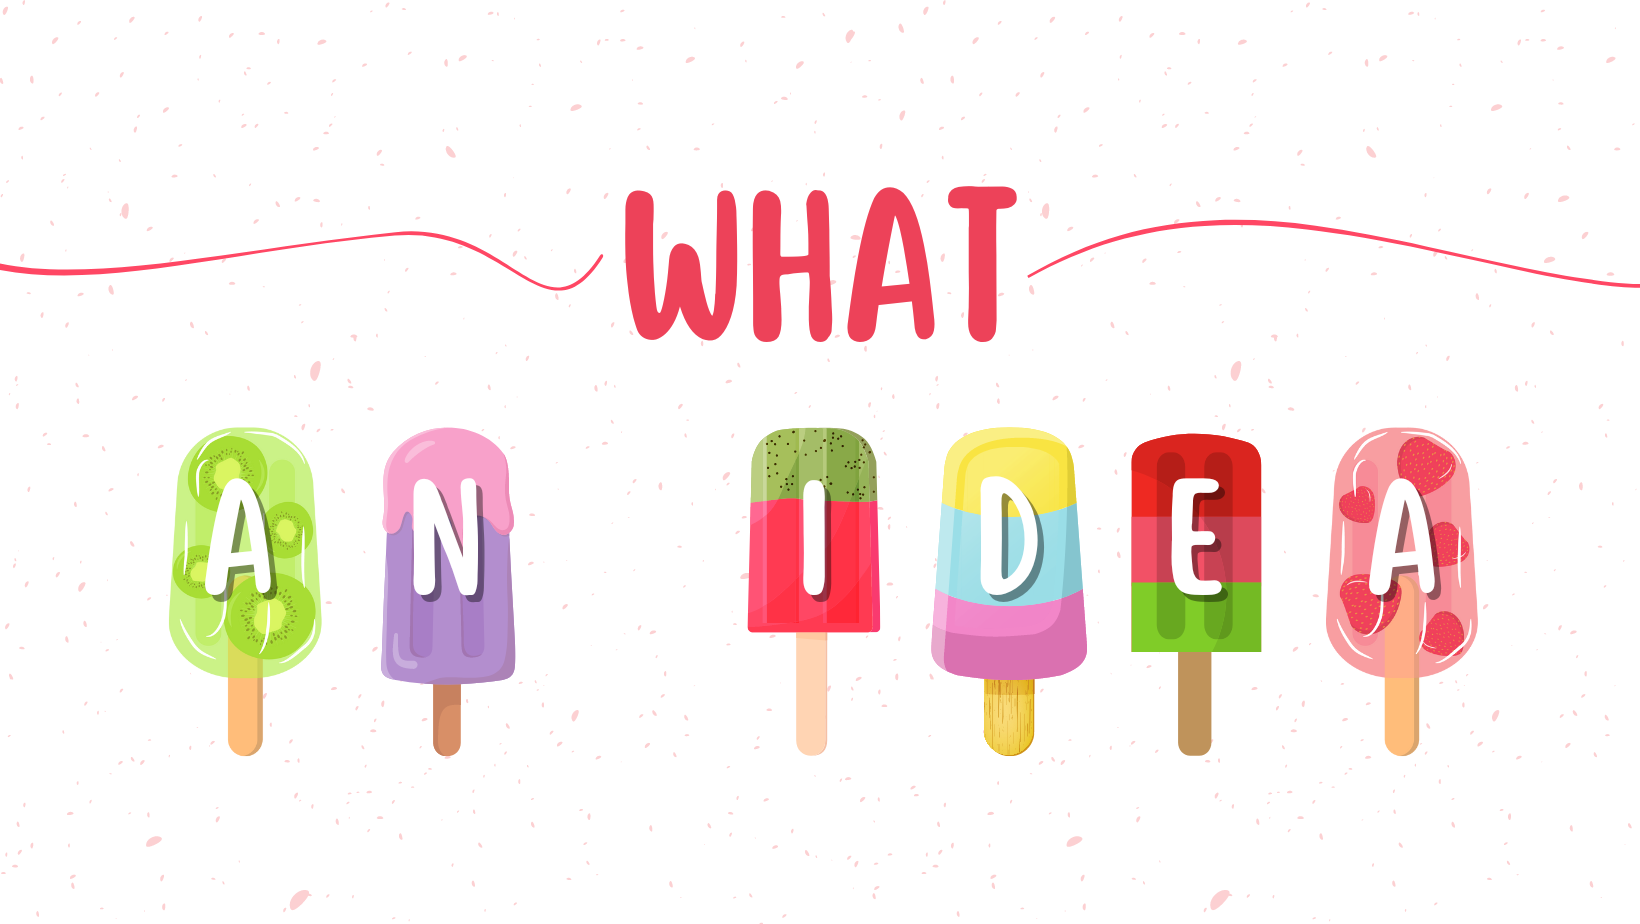 Popsicles came from what?